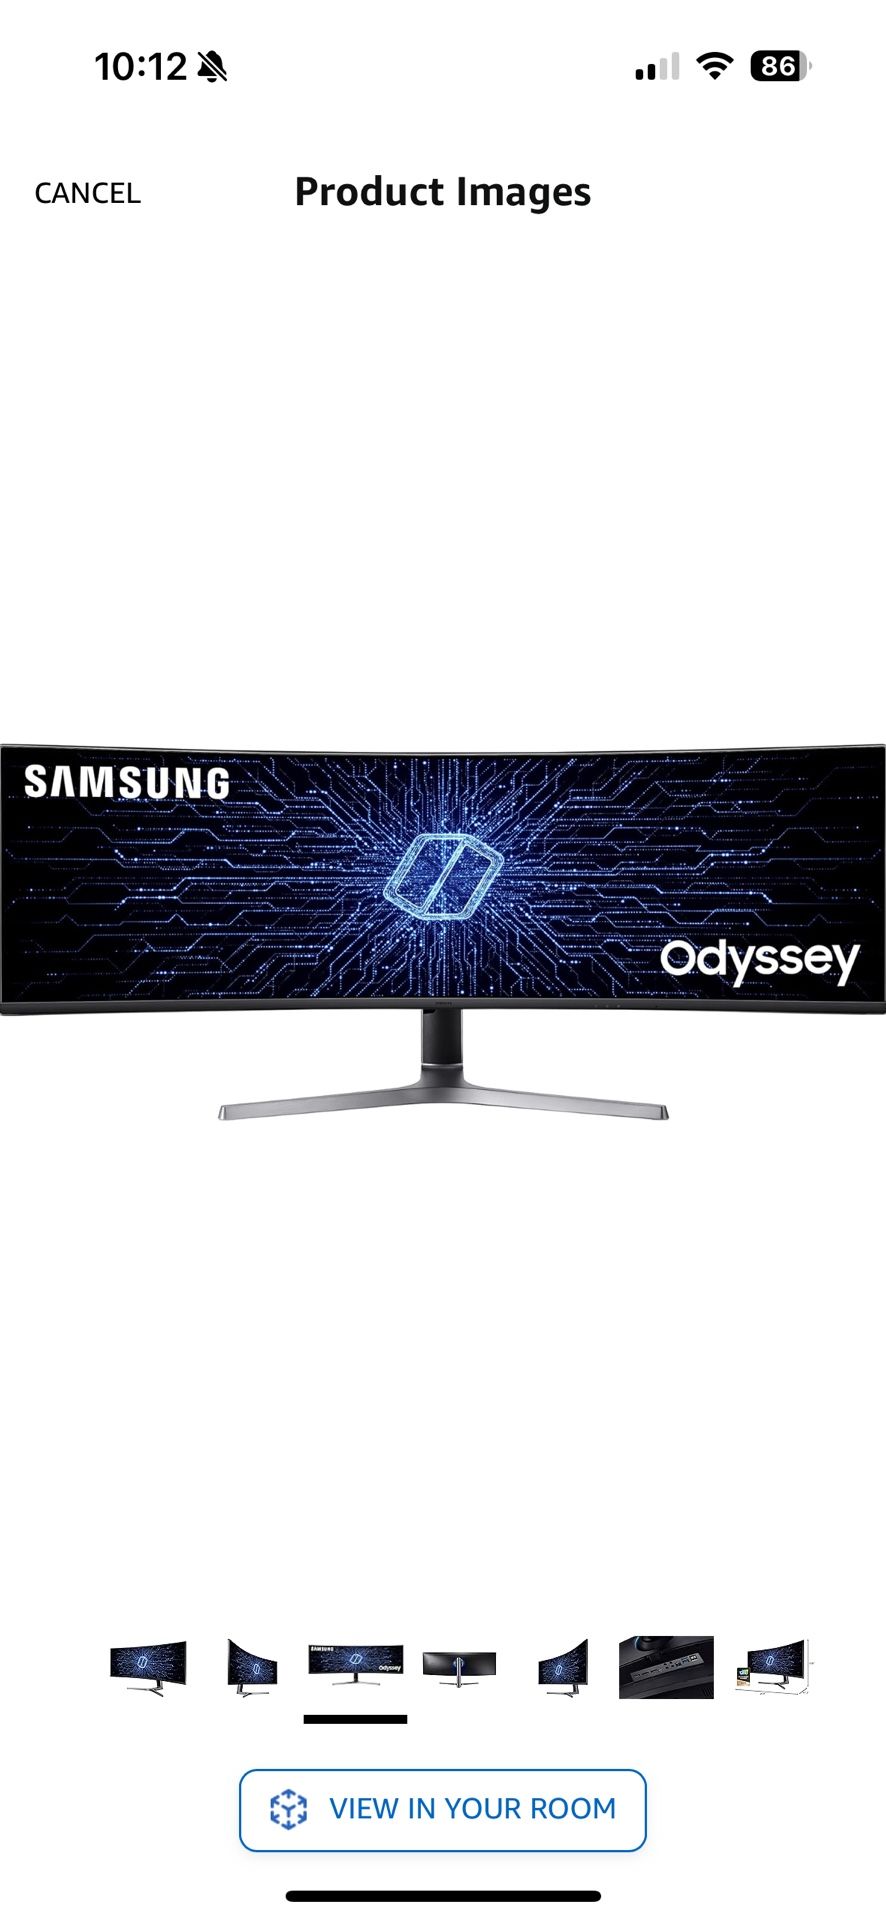 SAMSUNG 49” Odyssey CRG Series Curved Gaming Monitor